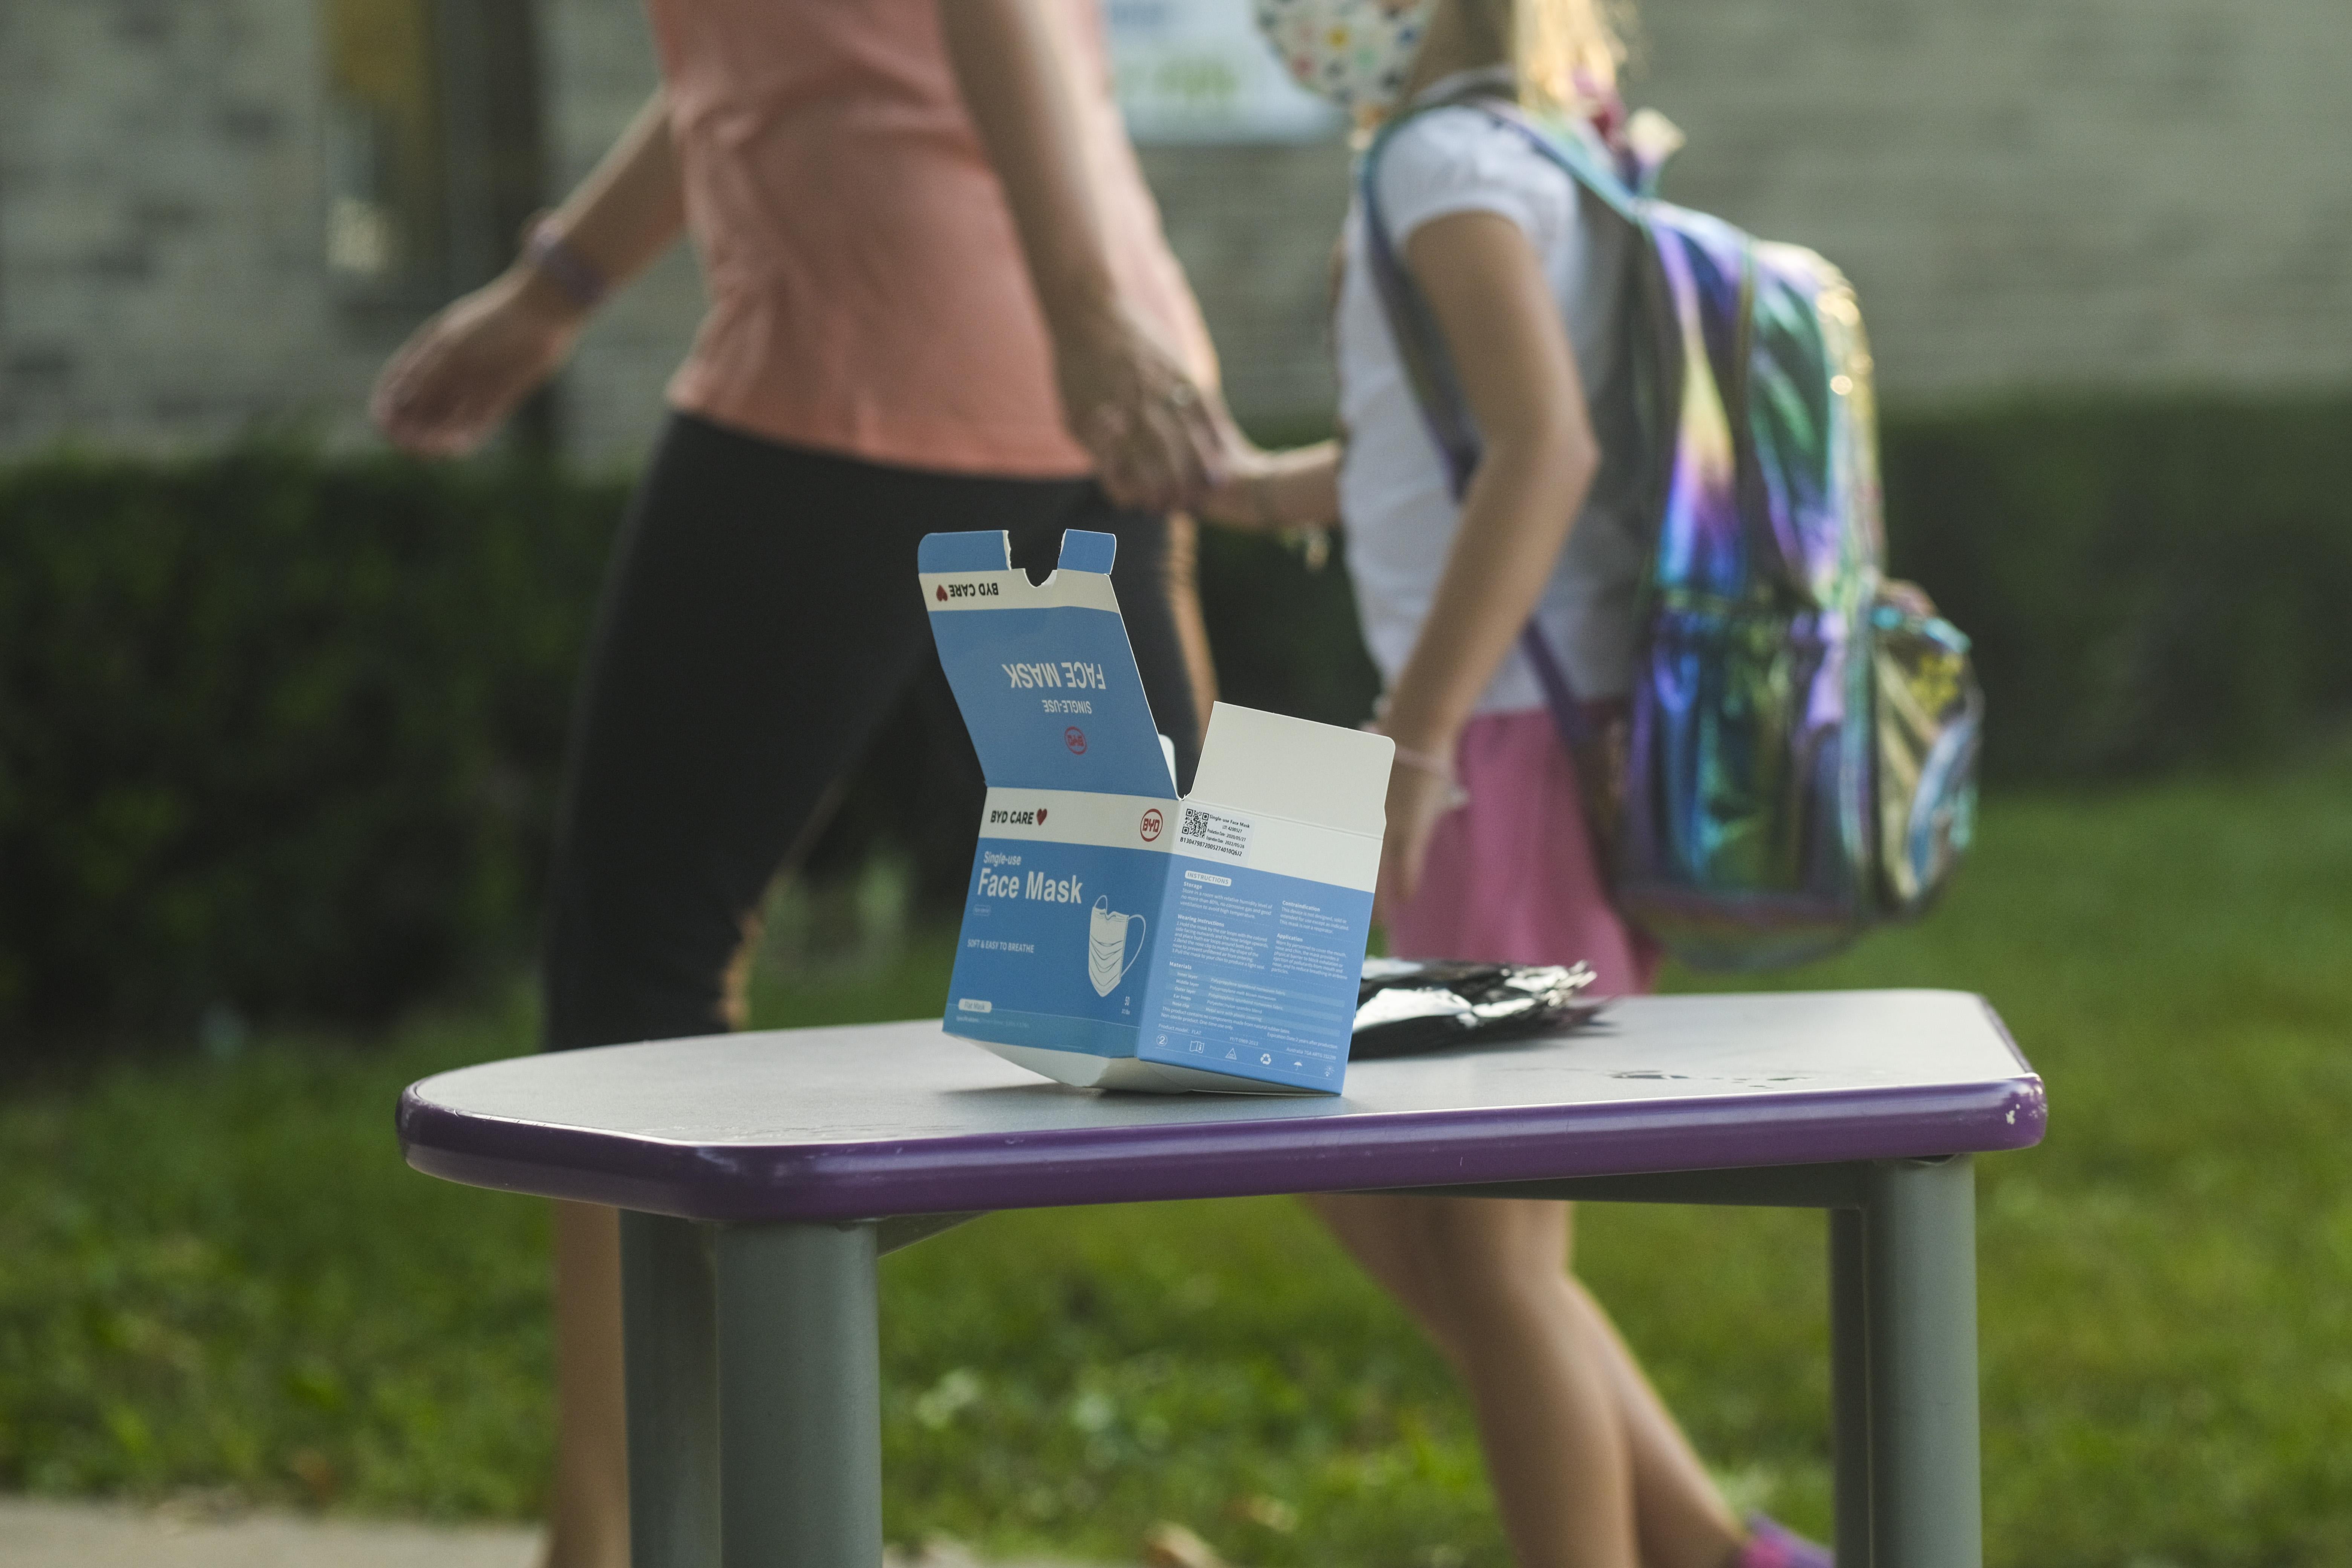 A box of face masks sits on a table outside of of a school. In the background, a parent holds their child's hand as they walk toward school. The child is wearing a face mask and backpack.